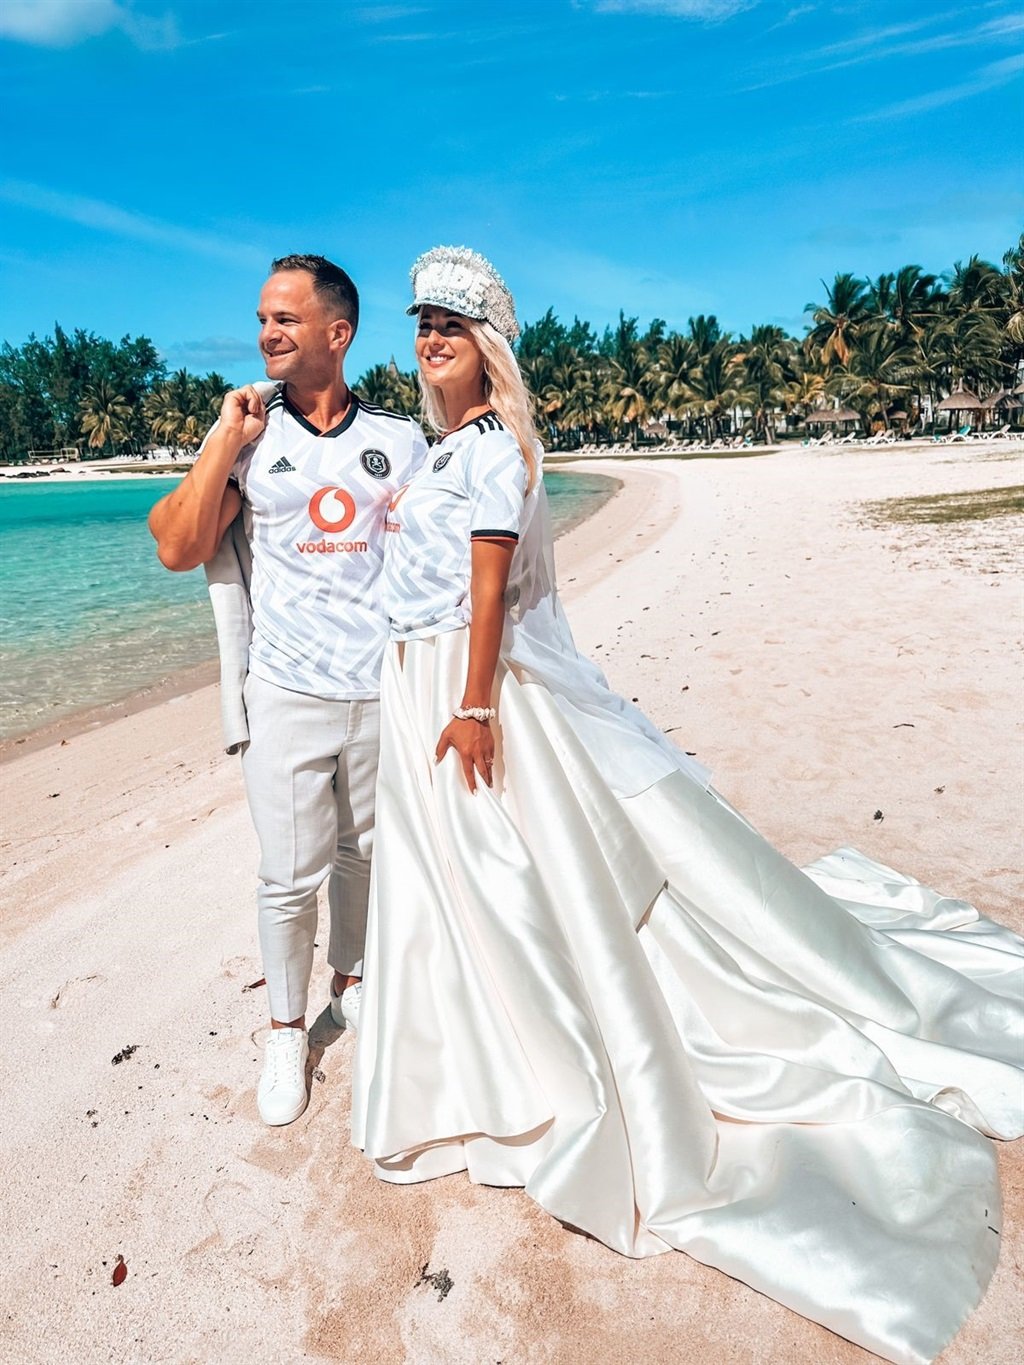 A couple that supports Orlando Pirates wore their away jerseys in their wedding photos.